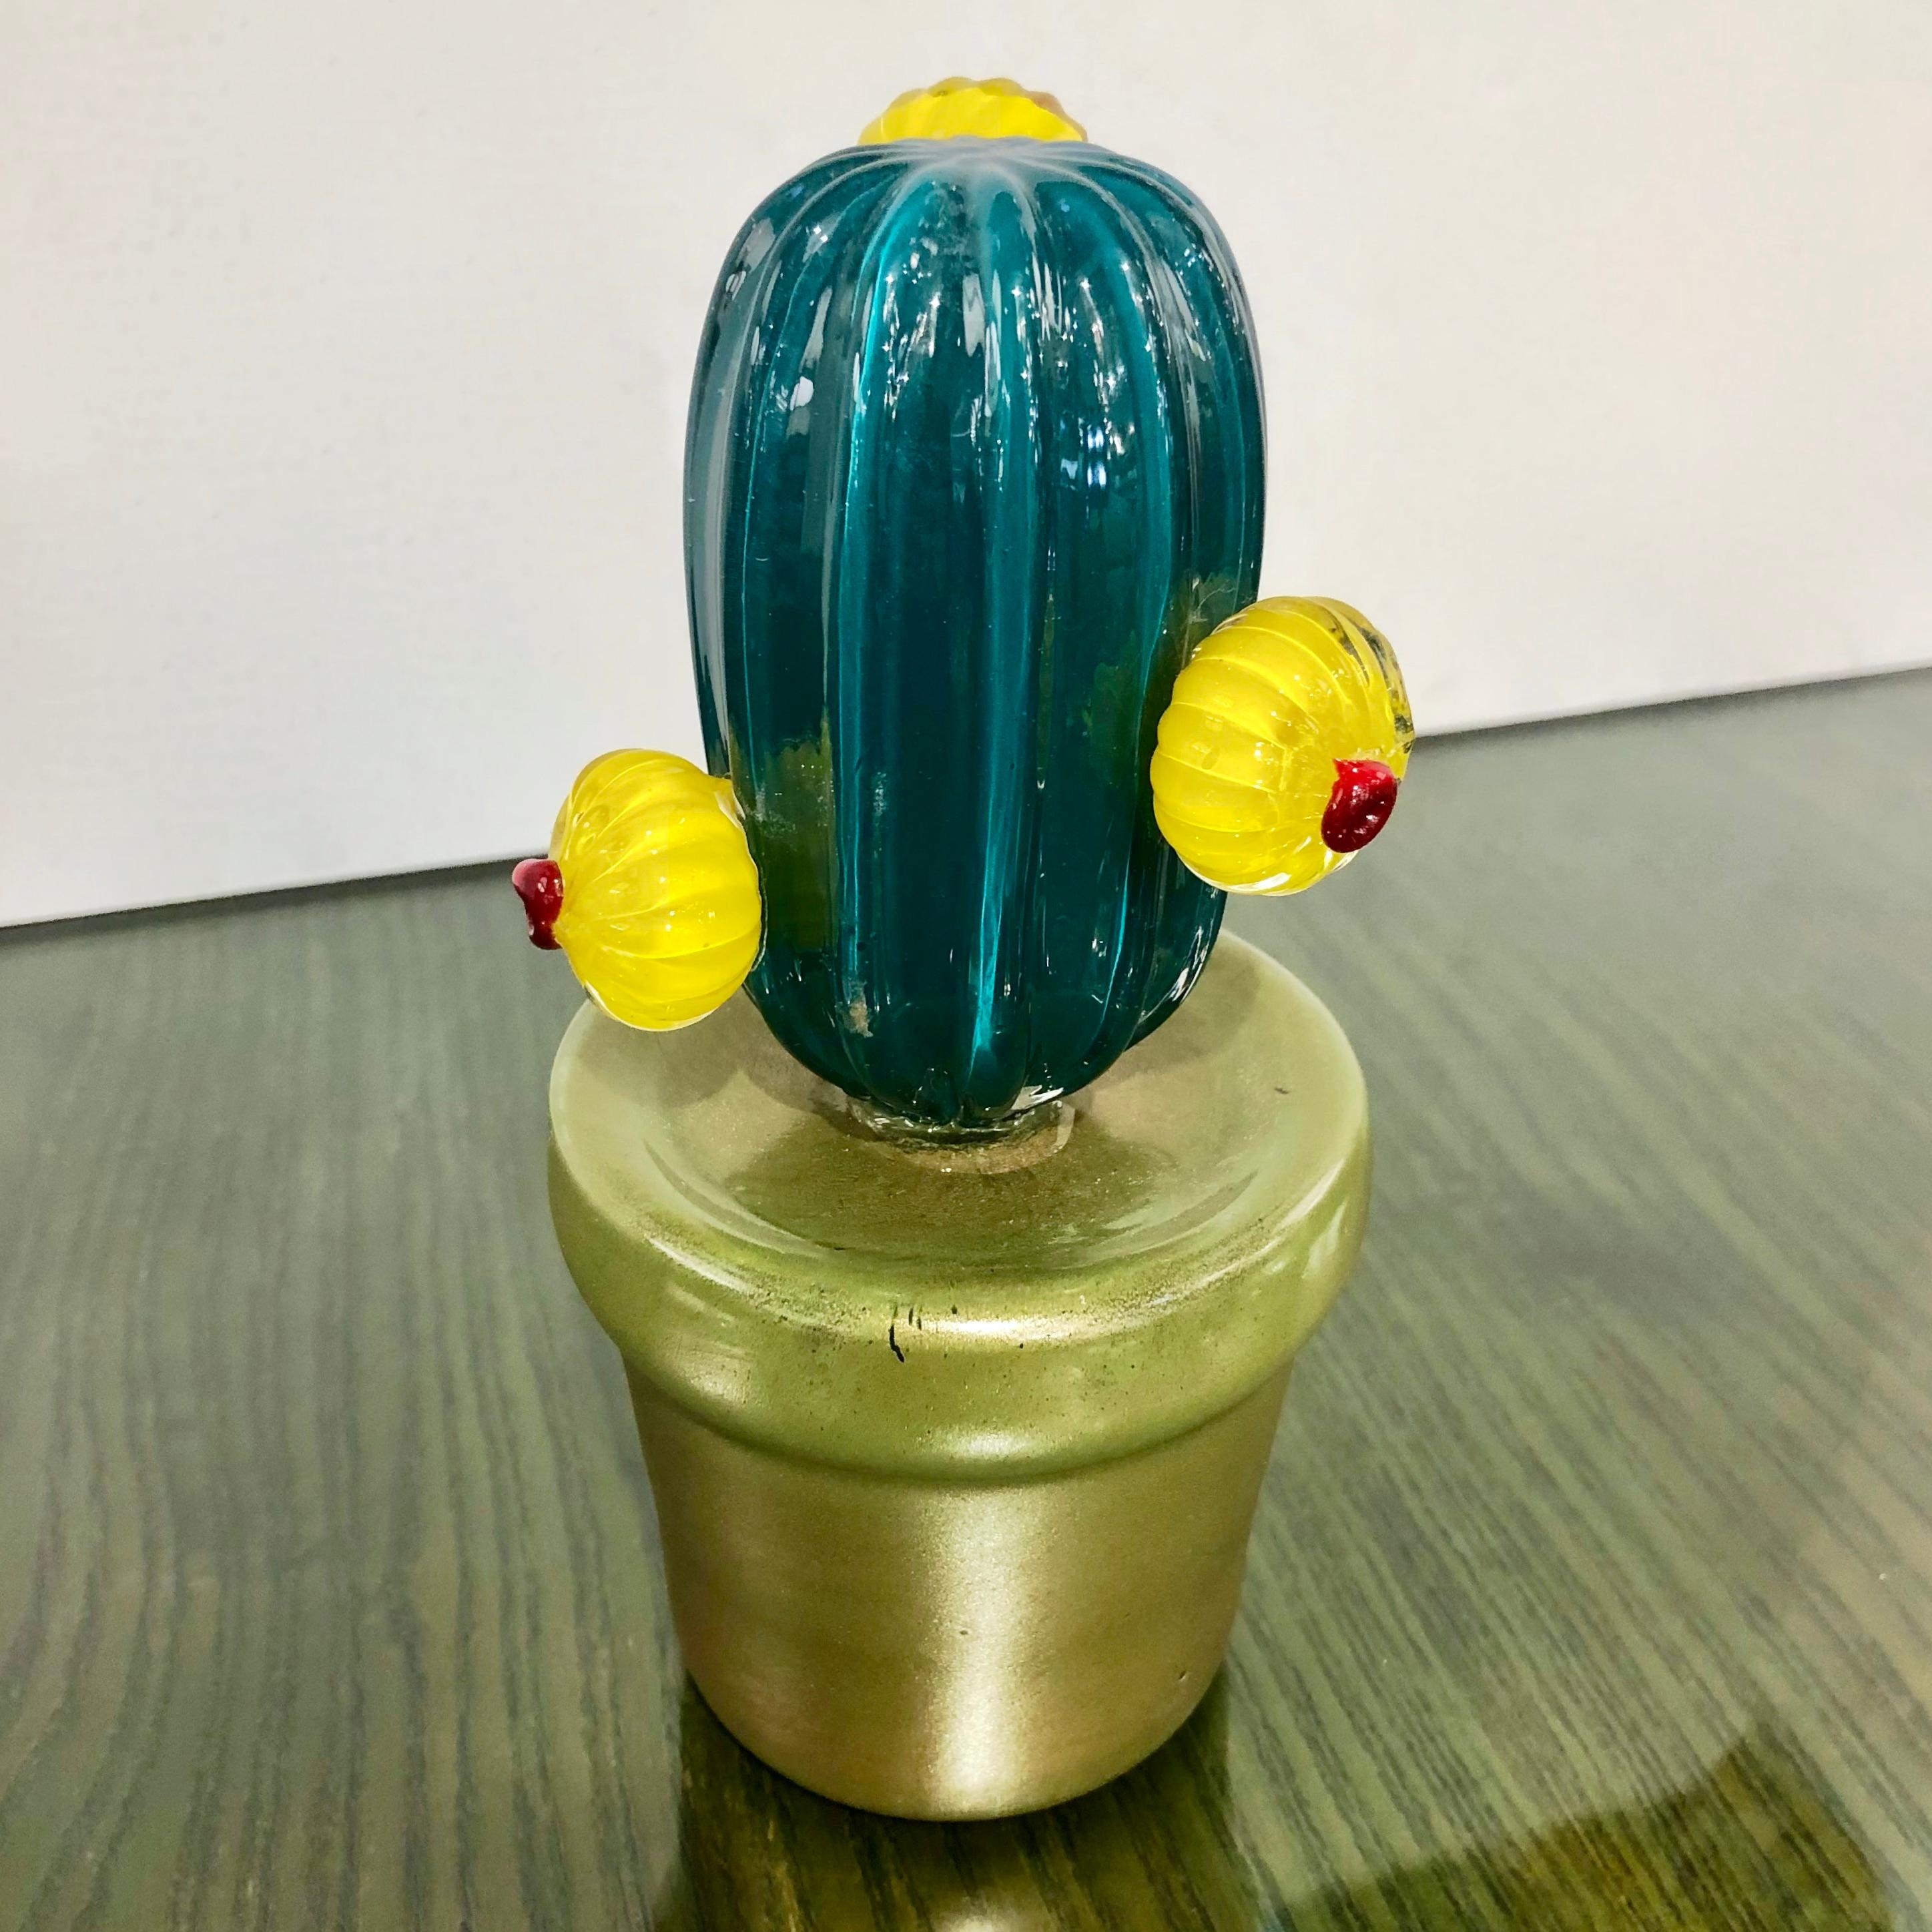 Contemporary Italian highly collectible potted glass cactus of limited edition, entirely handcrafted in Murano, with modern Minimalist design blown by Fornace Mian, with lifelike organic modernist shape in teal green textured Murano glass